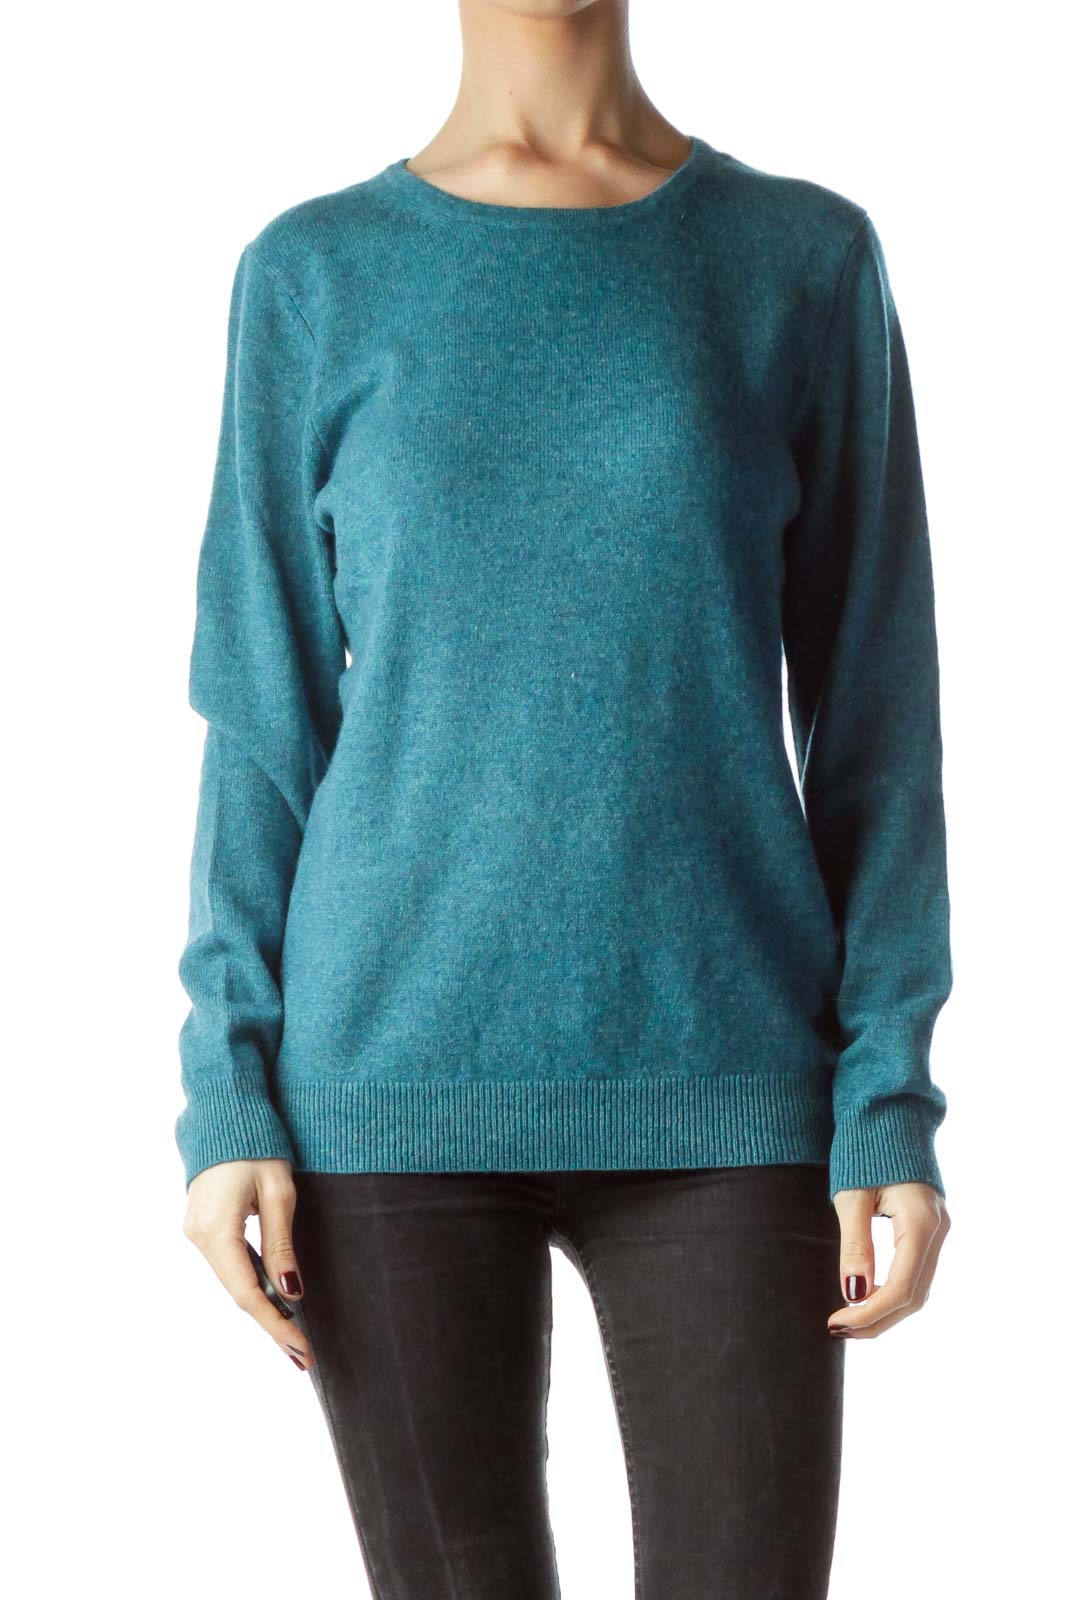 Teal Blue 100% Cashmere Sweater Front